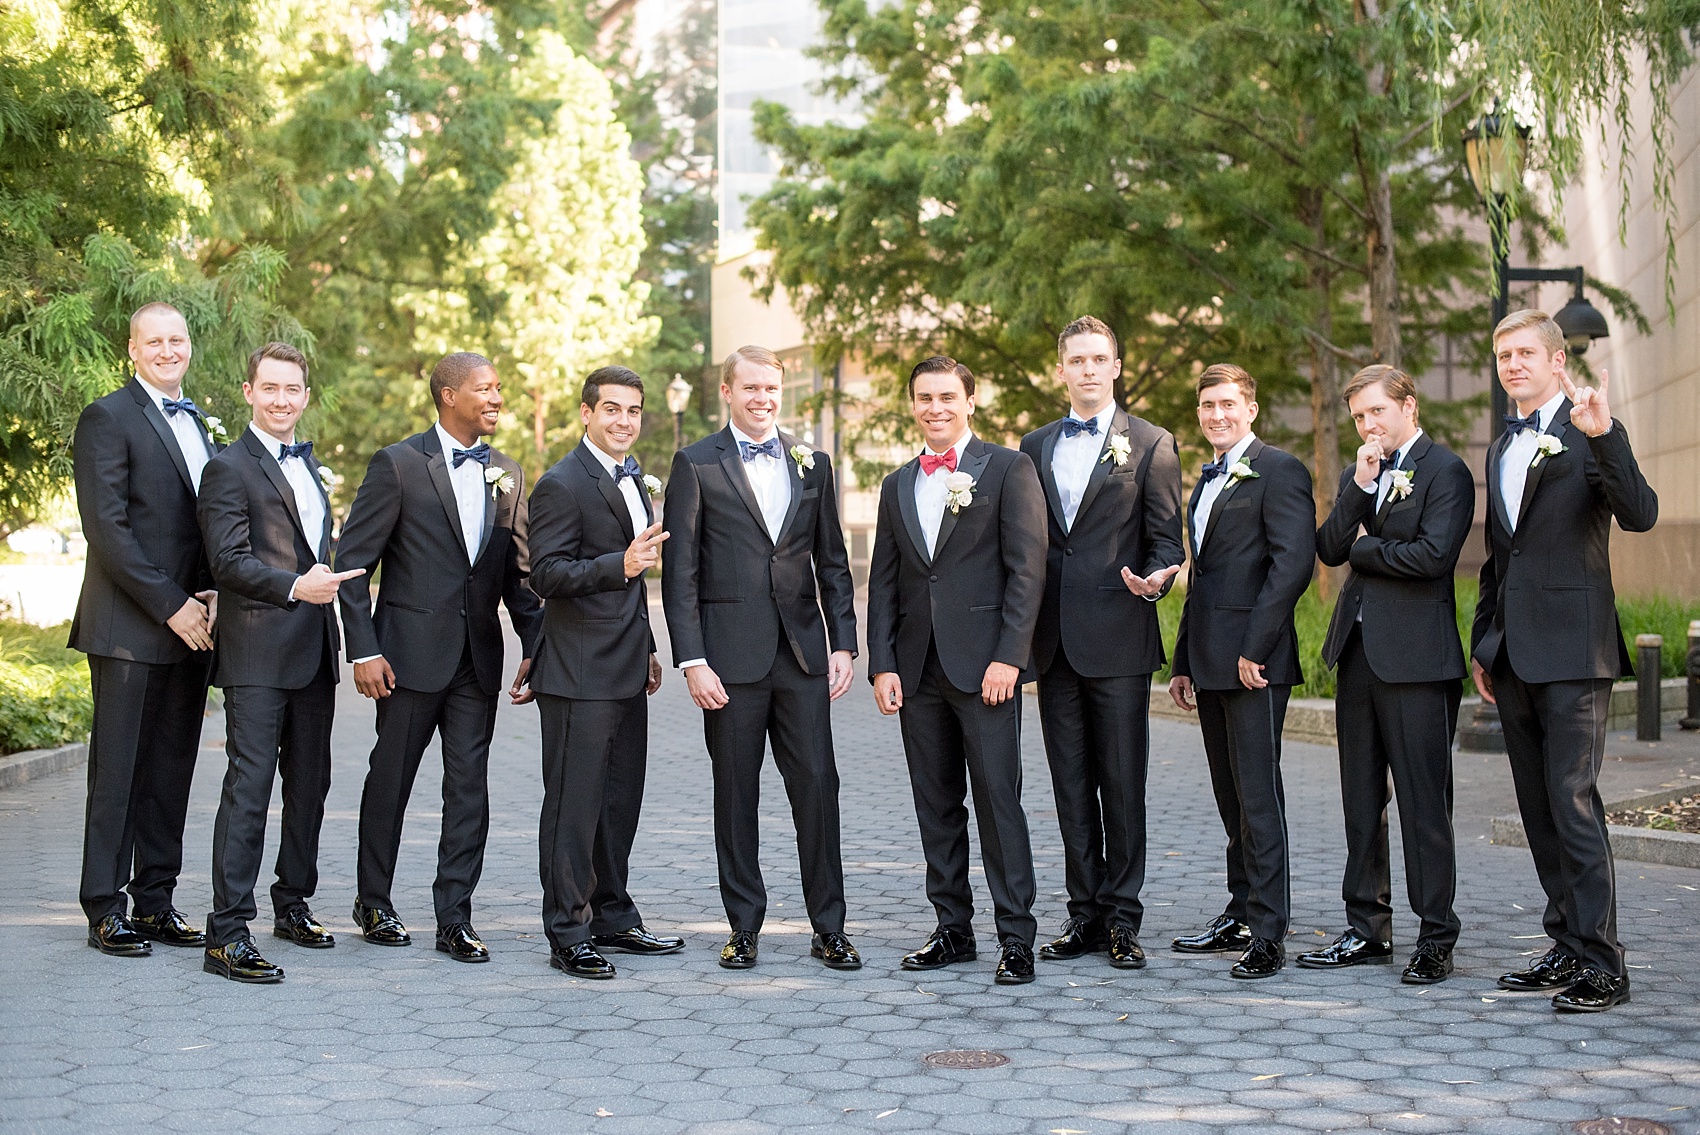 Groomsmen photos in Battery Park. Photo by NYC wedding photographer, Mikkel Paige Photography.